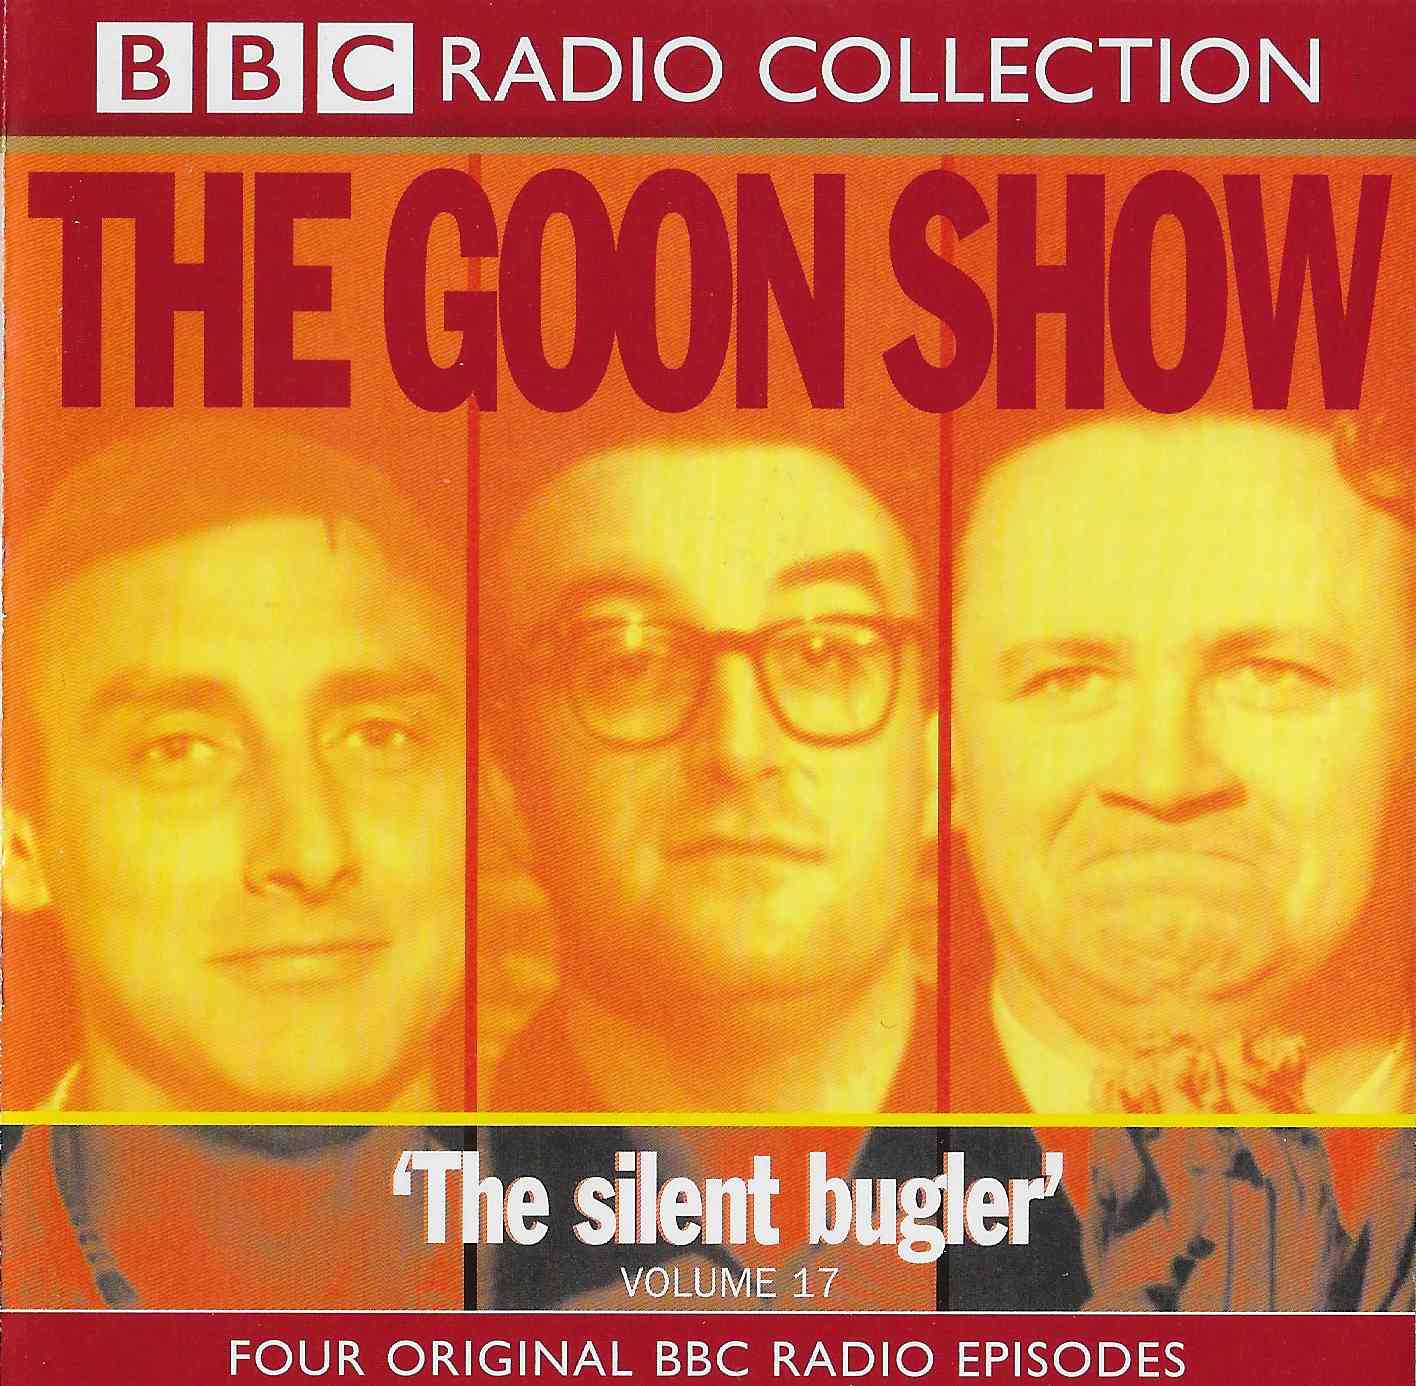 Picture of ISBN 978-0-563-55292-5 The Goon Show 17 - The silent bugler by artist Spike Milligan / Larry Stephens